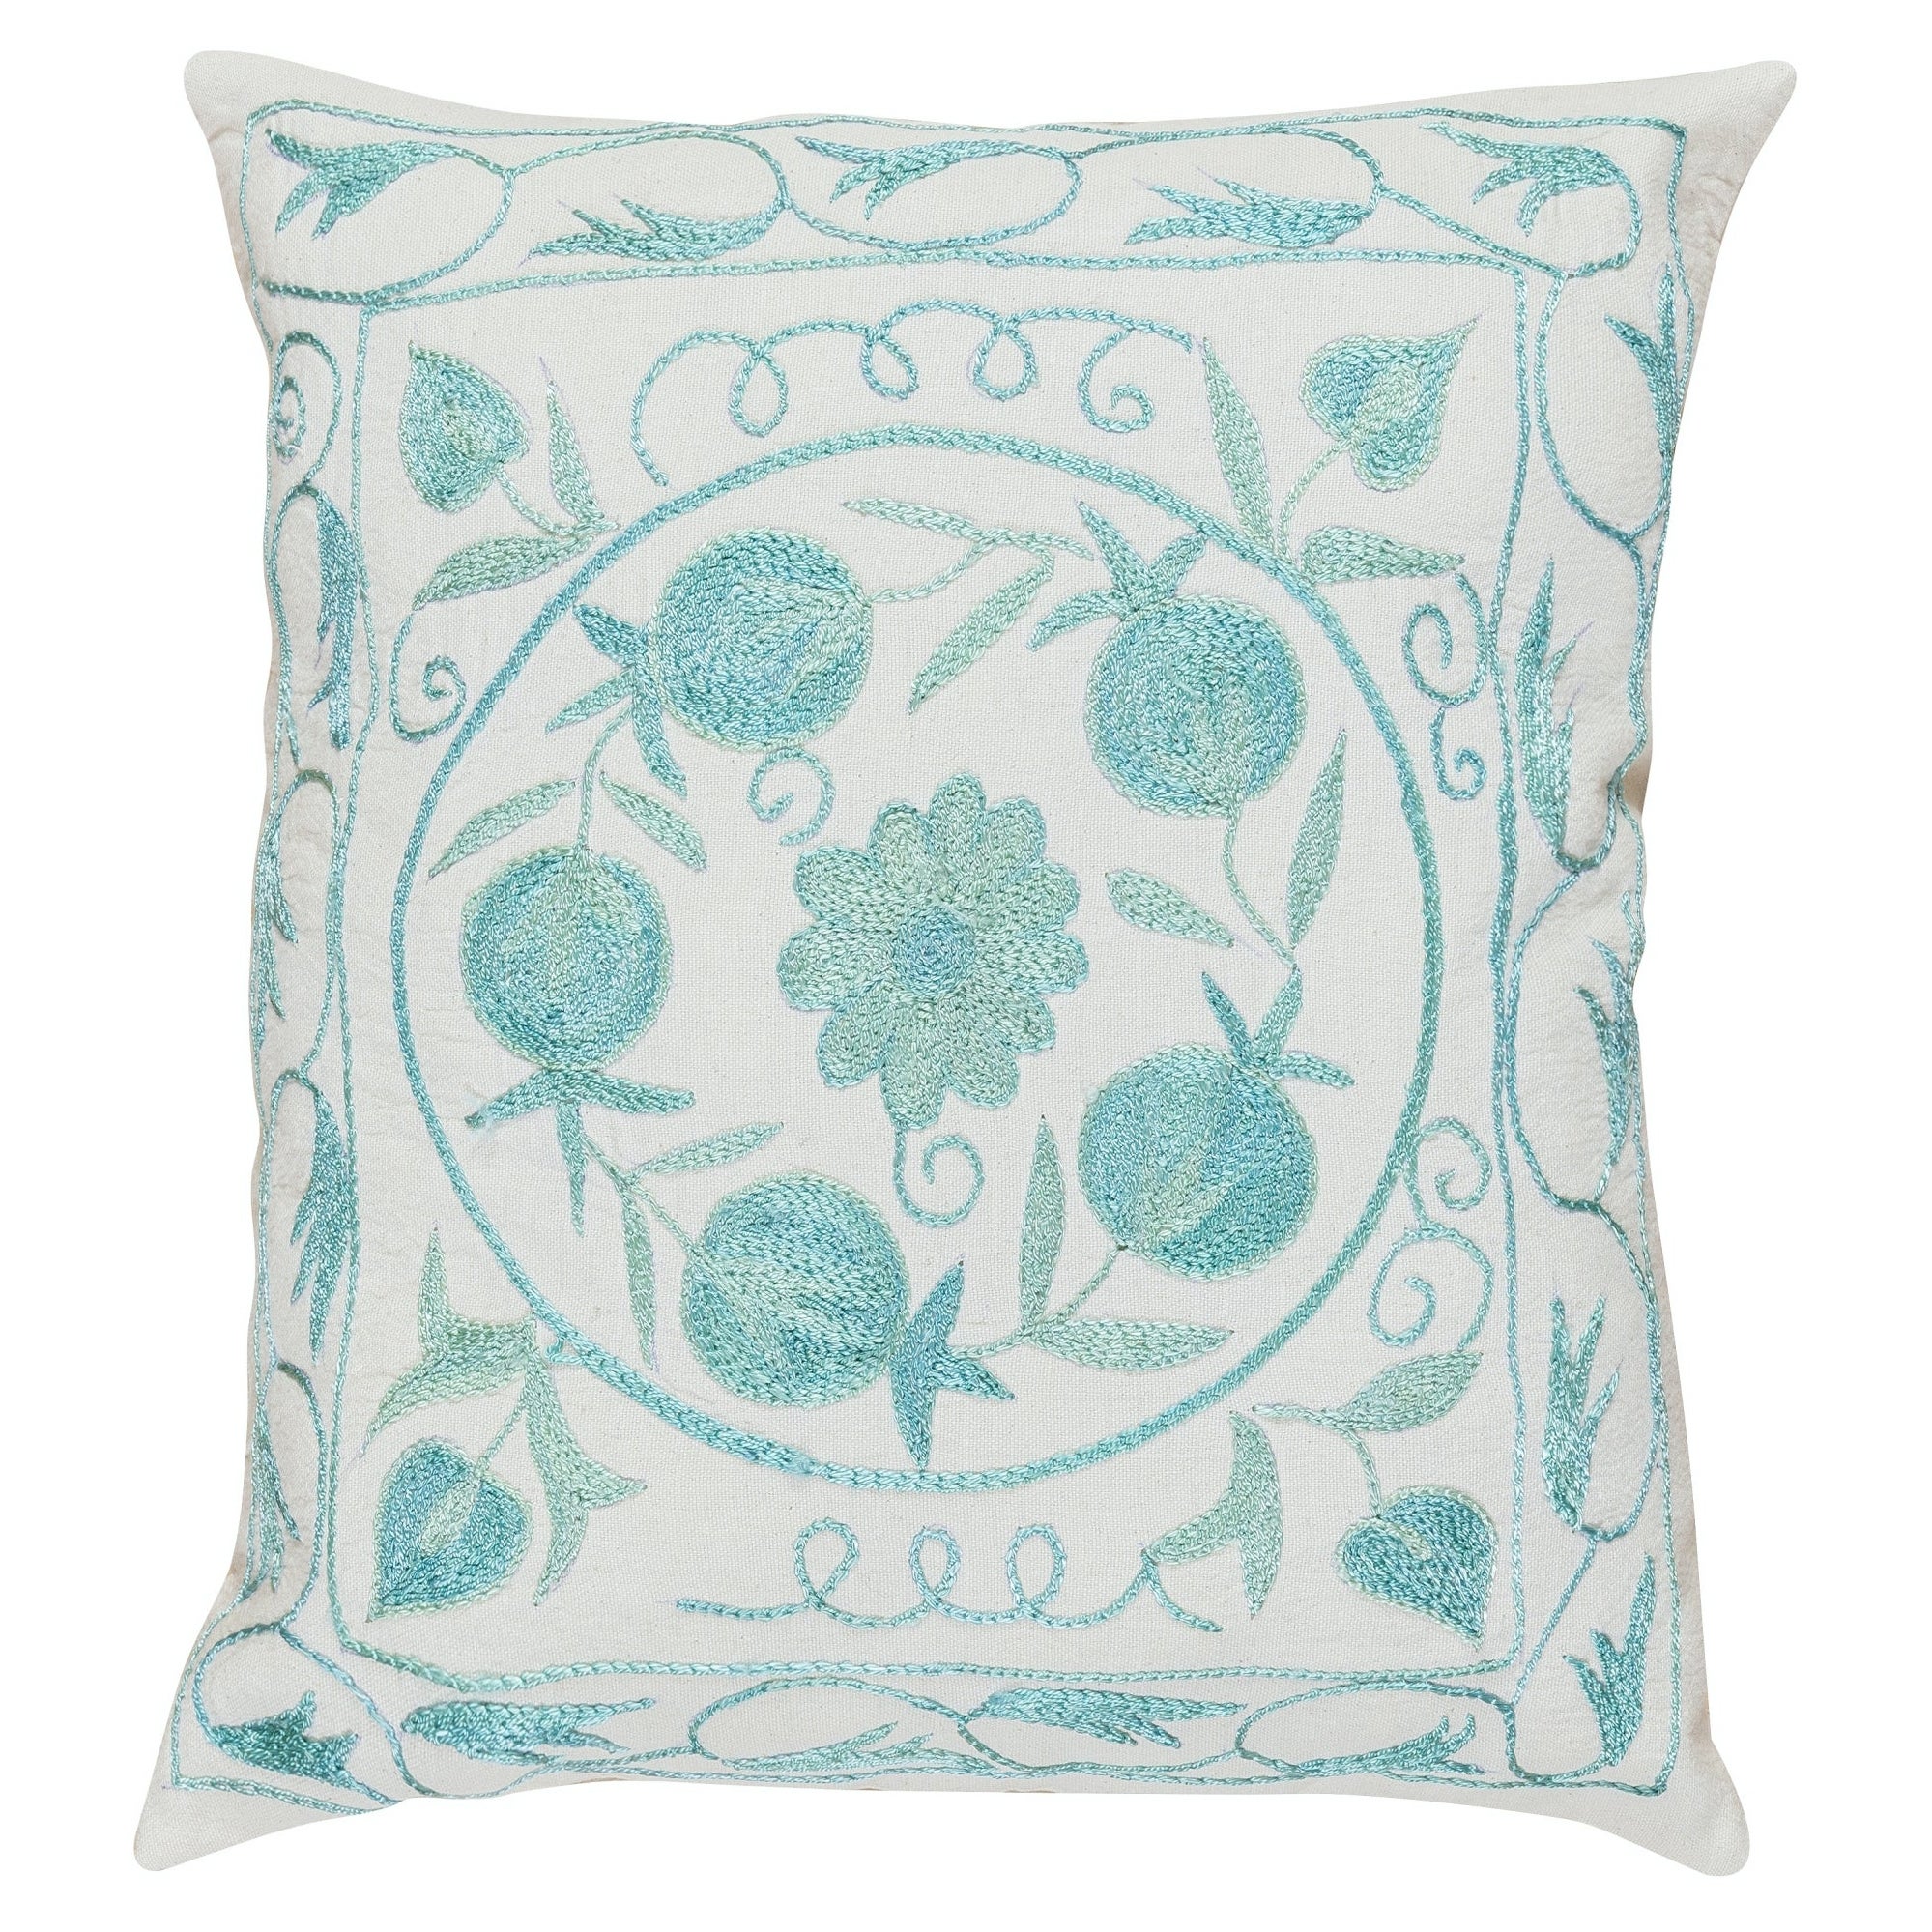 Silk Suzani Hand Embroidery Cushion Cover in Light Teal Blue & Cream. 16"x18"